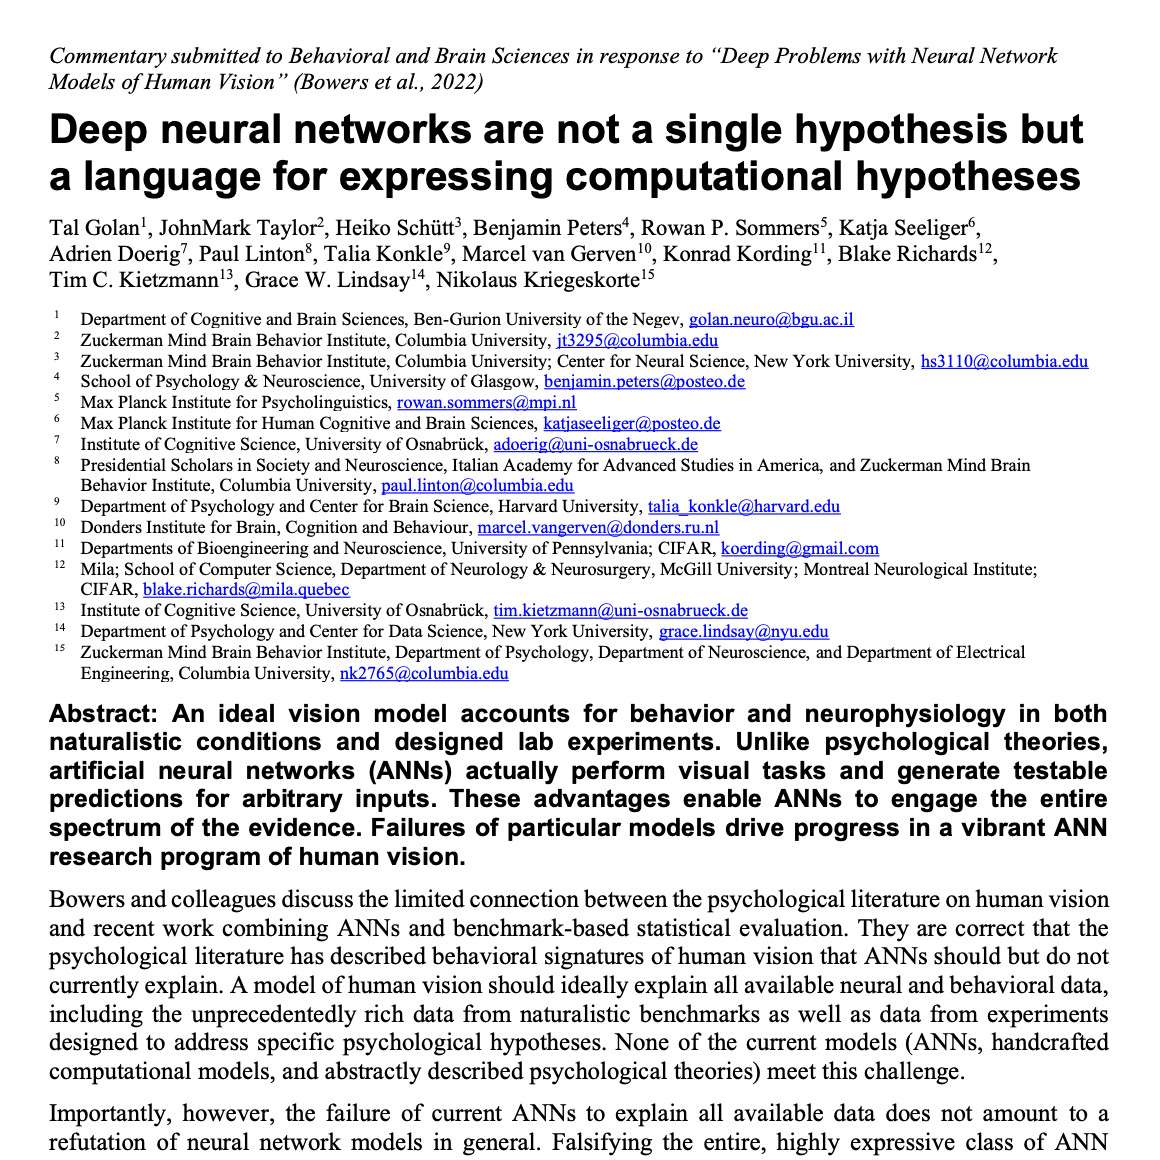 Deep neural networks are not a single hypothesis but a language for expressing computational hypotheses